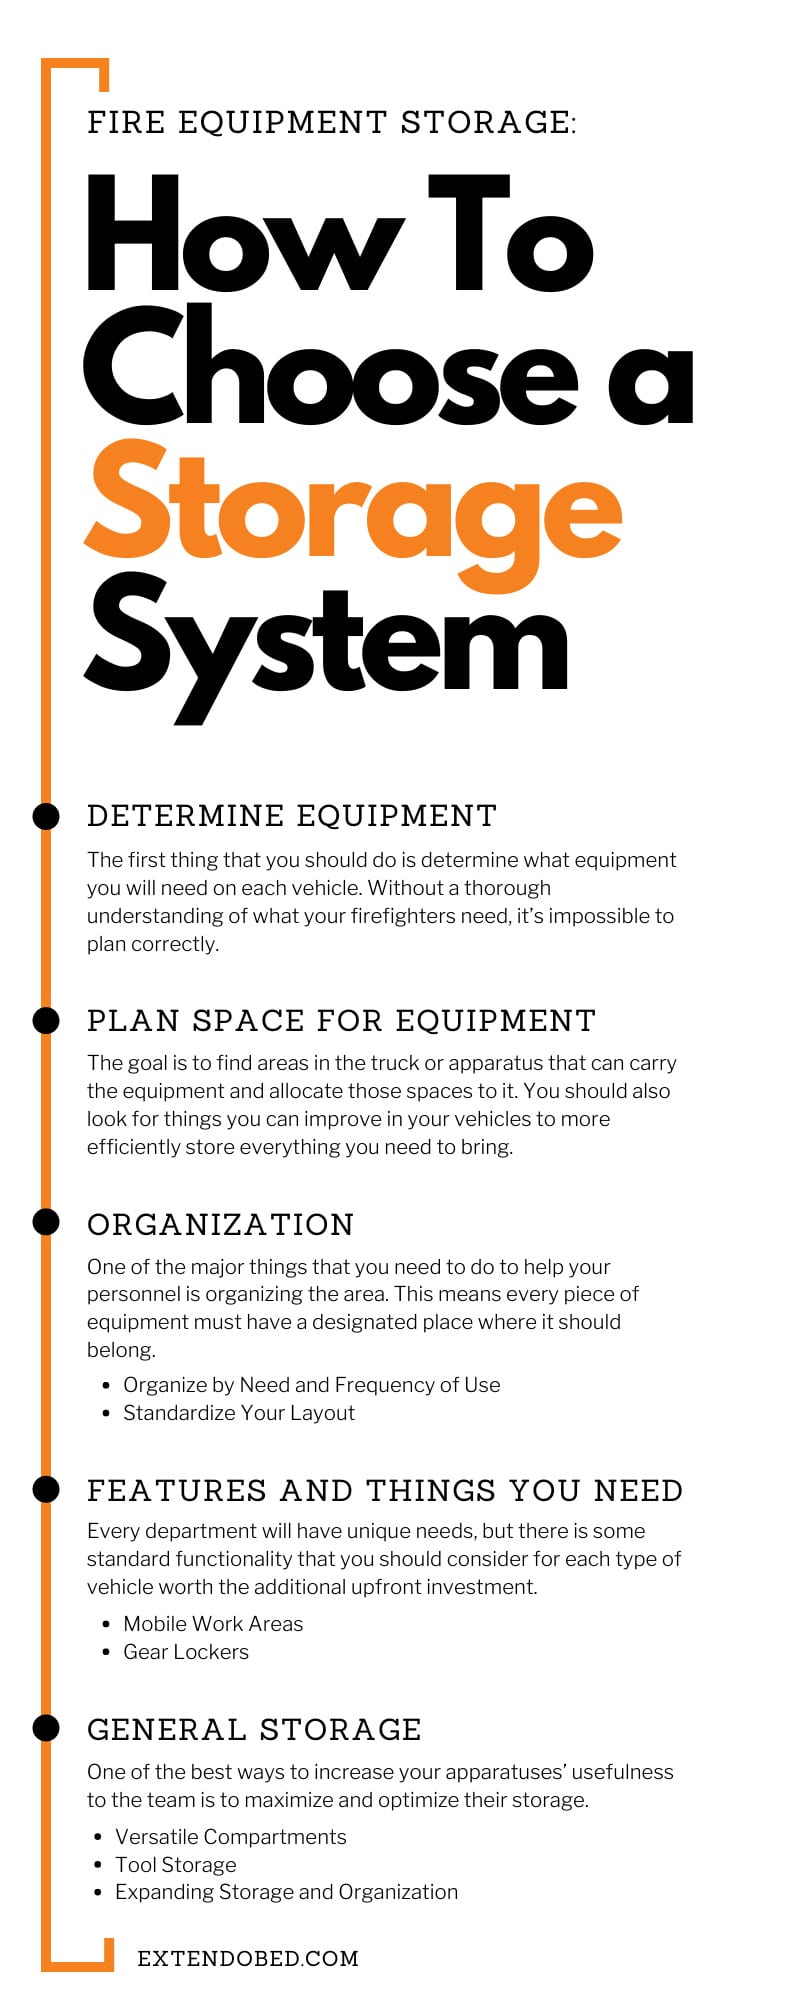 Fire Equipment Storage: How To Choose a Storage System